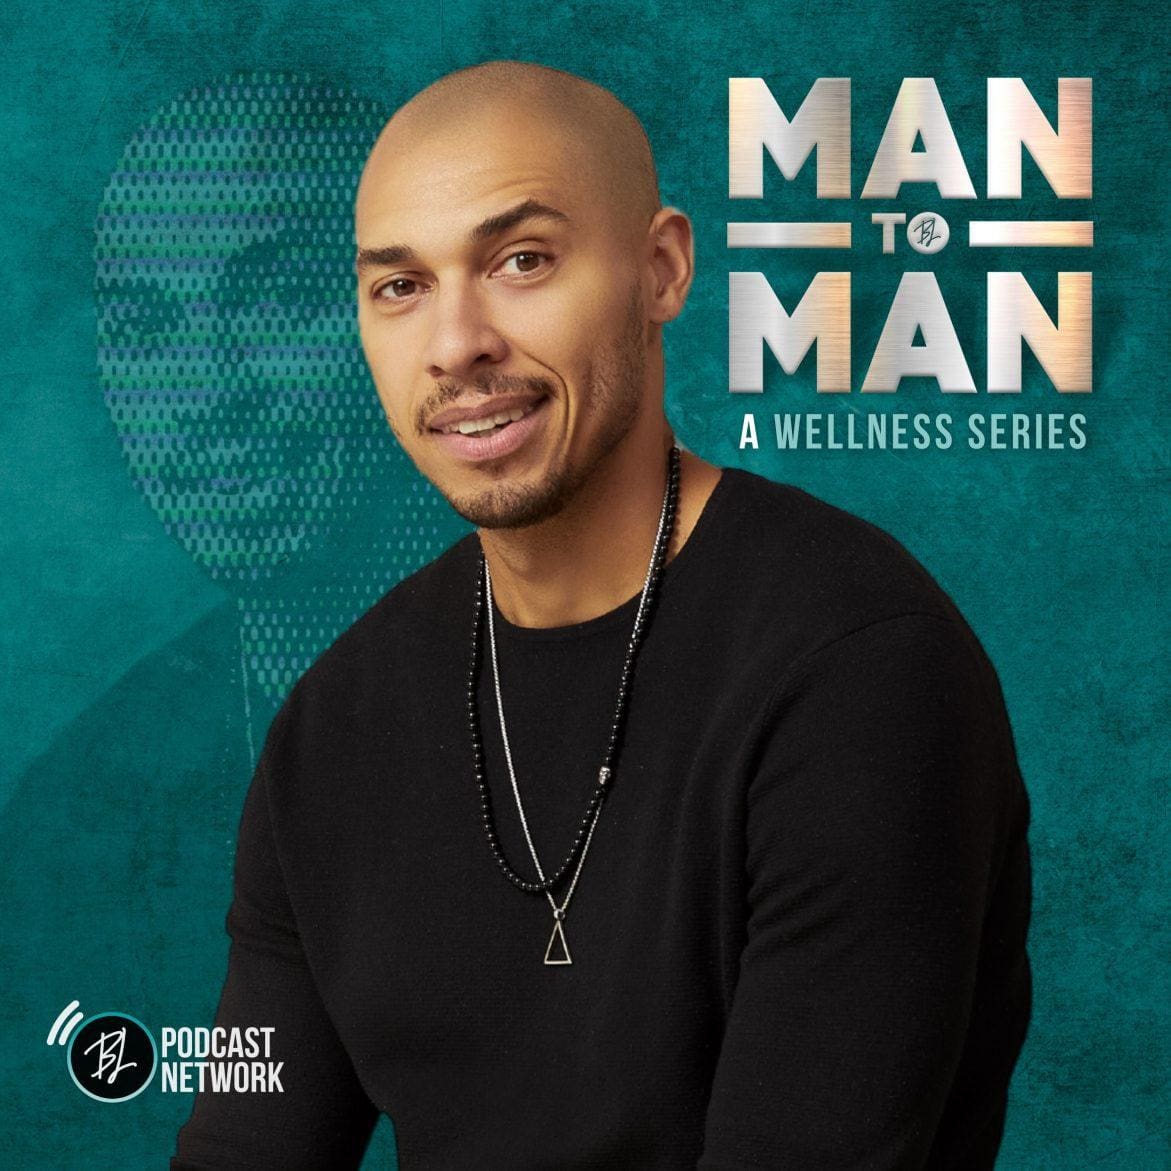 Black Podcasting - Man to Man with Lee Hammock